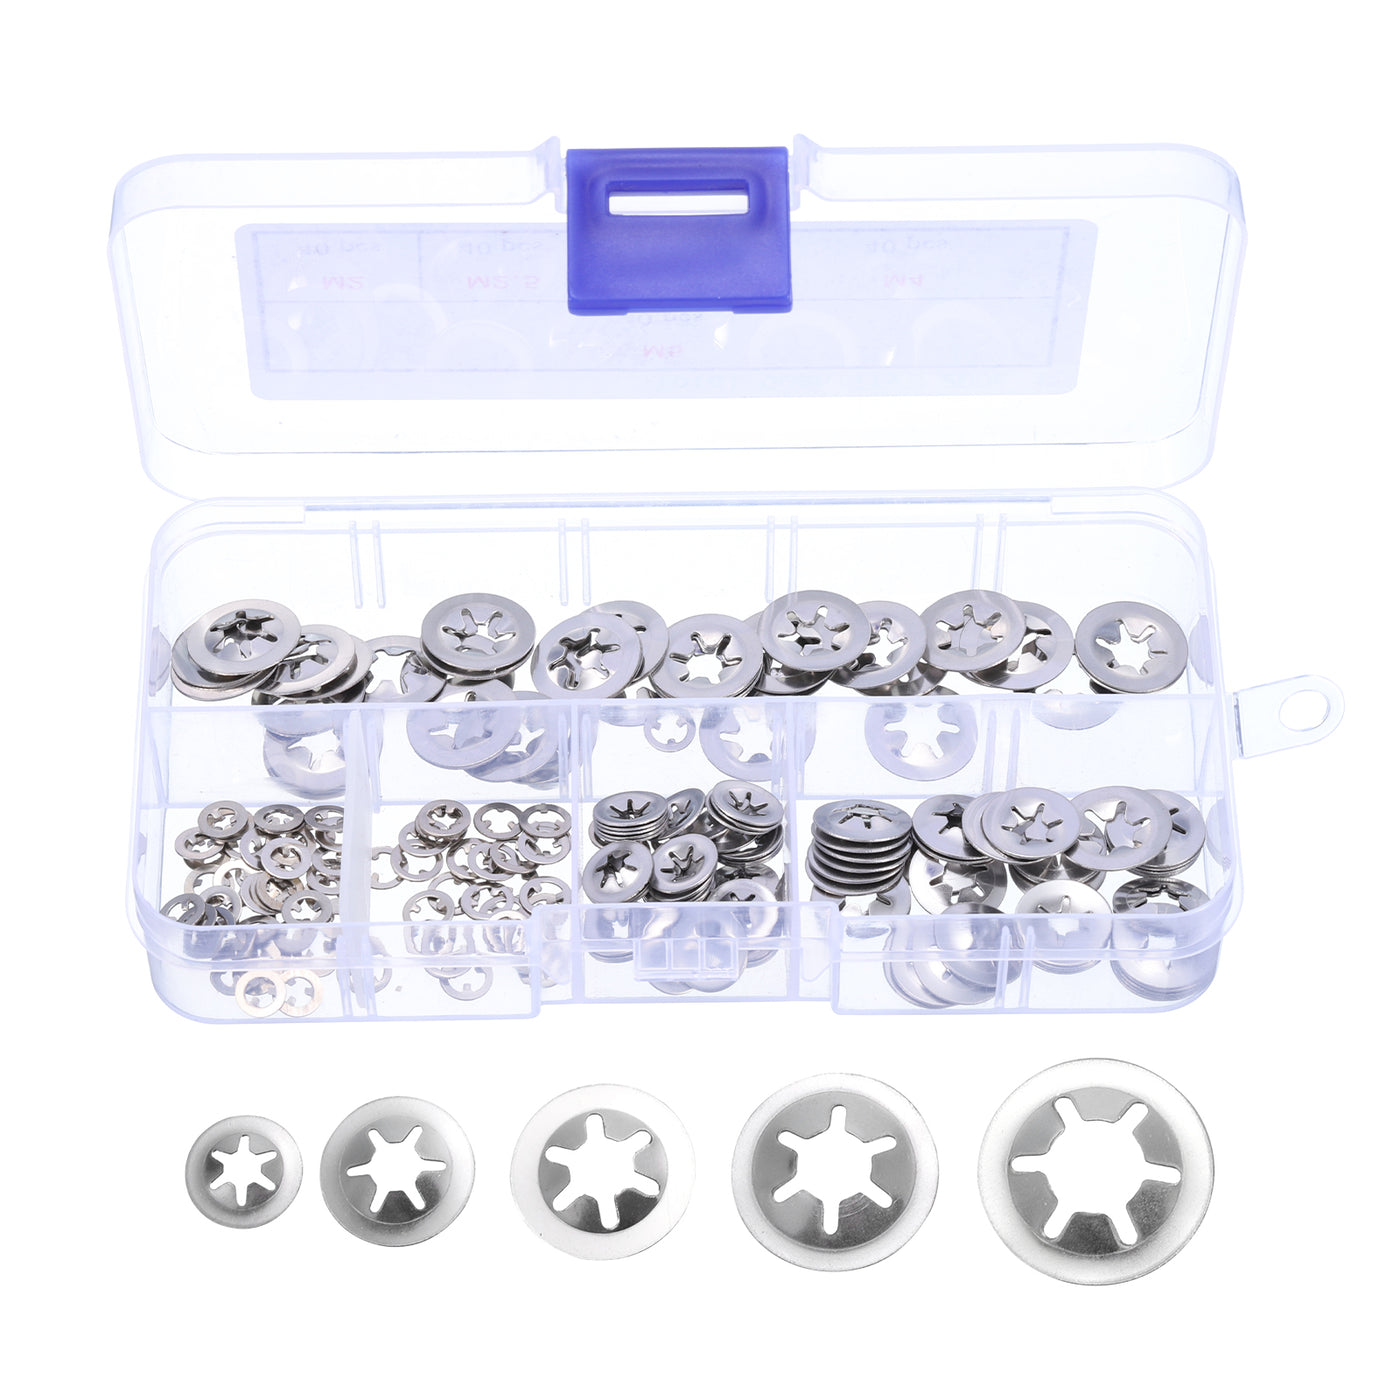 uxcell Uxcell 200pcs Internal Tooth Star Lock Washers Set M2 M2.5 M3 M4 M5, Stainless Steel